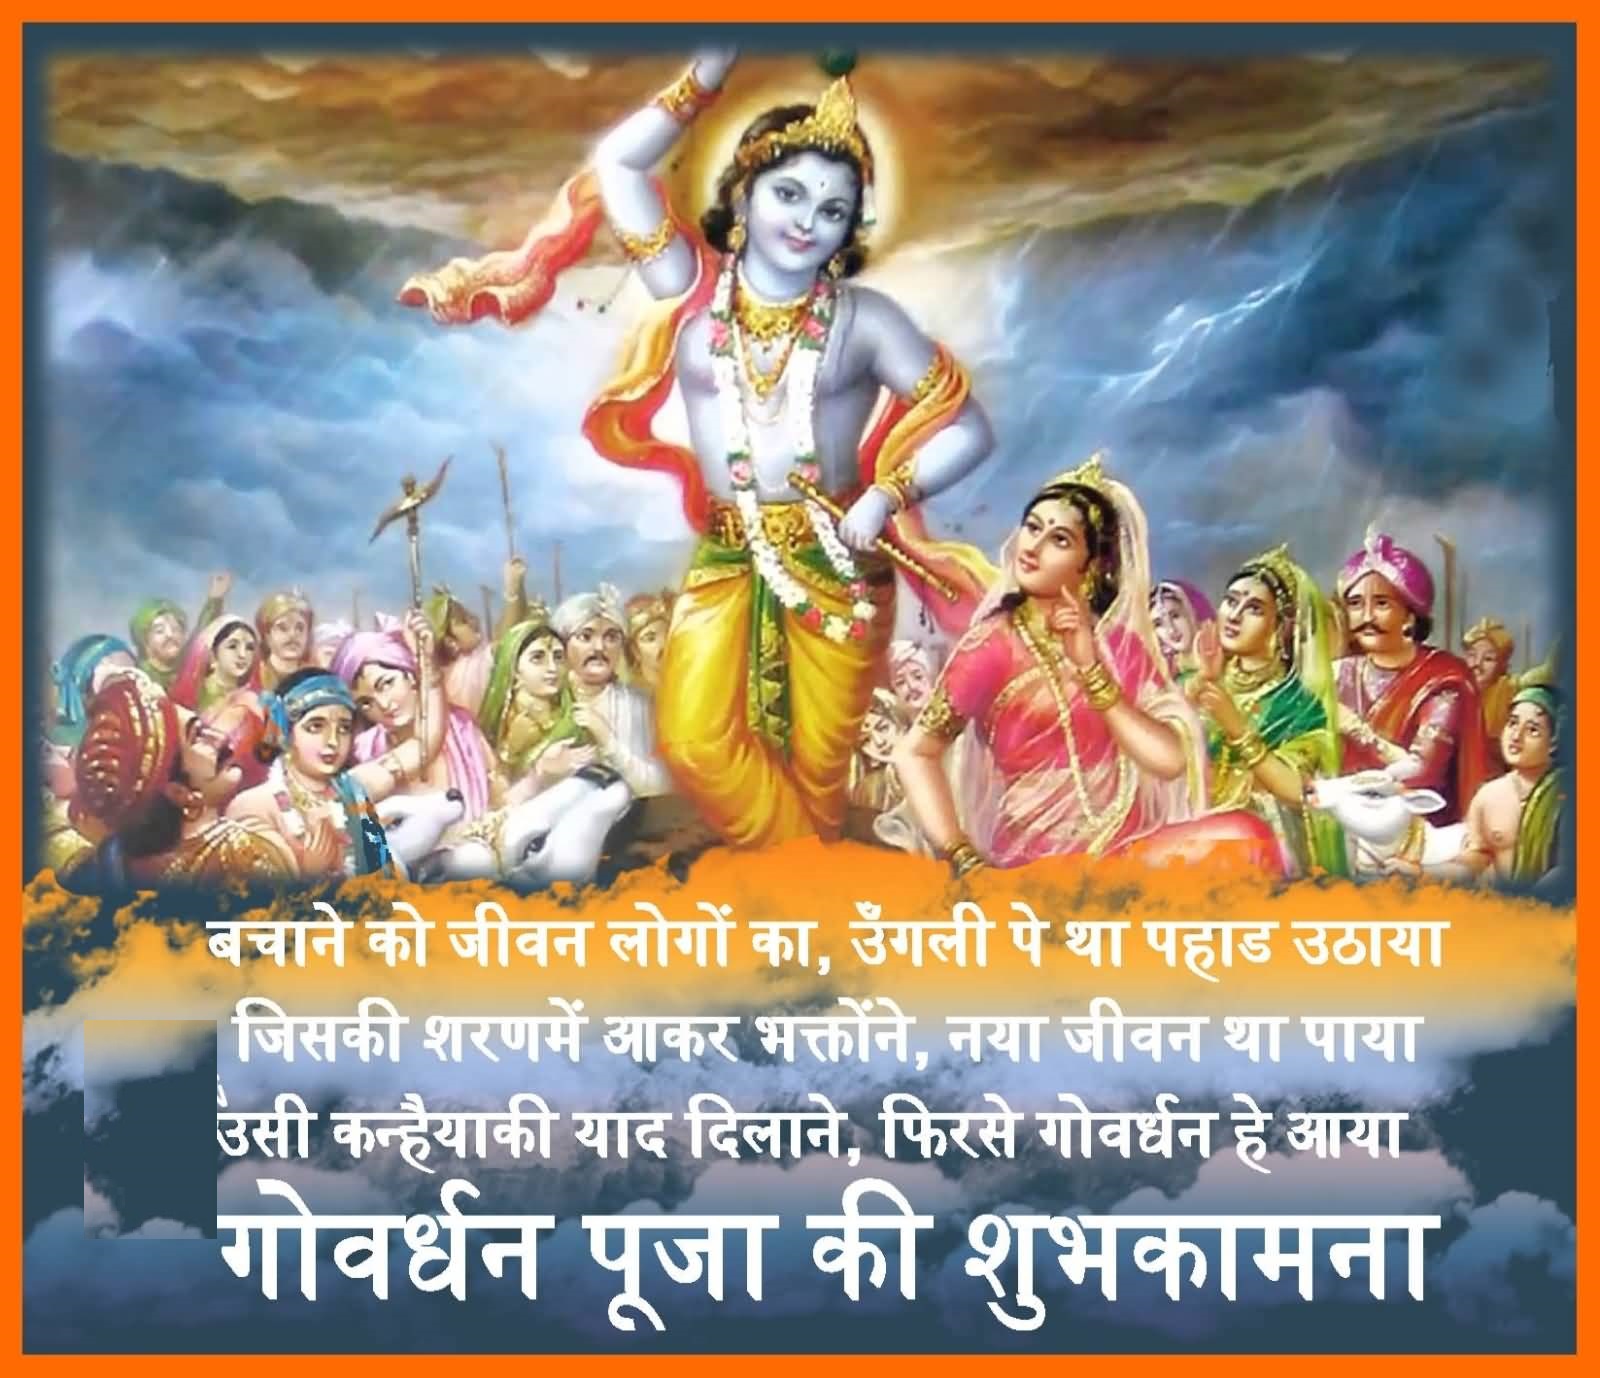 Happy Govardhan Puja Wishes Images & Picture